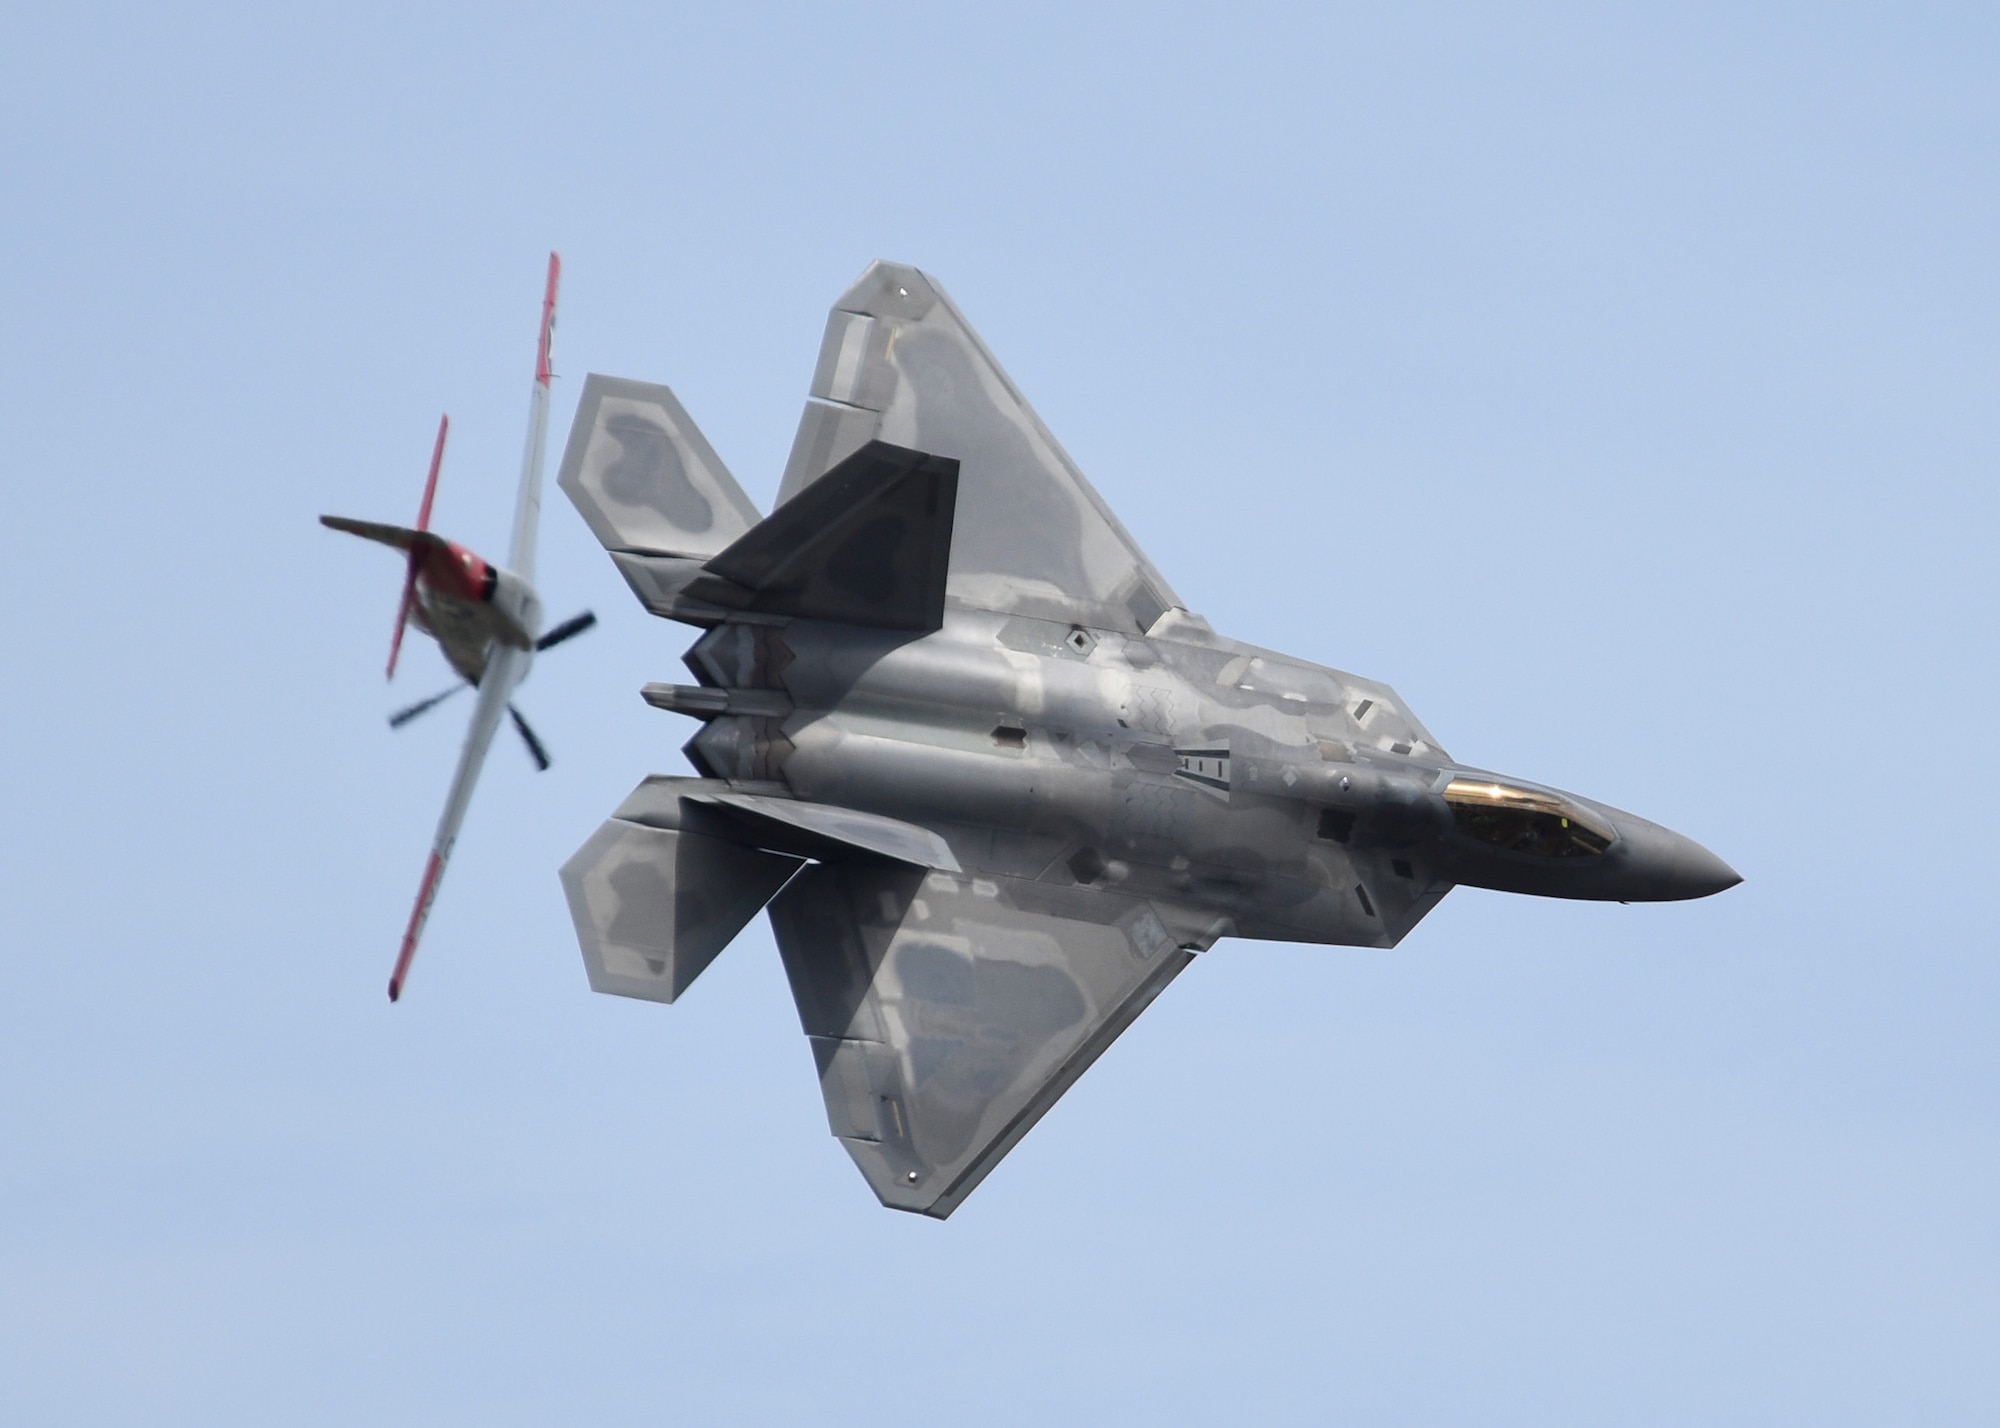 An F-22 Raptor and a P-51 Mustang perform a Heritage Flight during the 2019 Skyfest 2019 Open House and Air Show at Fairchild Air Force Base, Washinton, June 22, 2019. Skyfest 2019 Open House and Airshow offered a unique view of Team Fairchild’s role in enabling Rapid Global Mobility for the U.S. Air Force. The show featured more than 13 aerial acts and 16 static display aircraft, as well as other attractions and displays. (U.S. Air Force photo by Airman 1st Class Lawrence Sena)